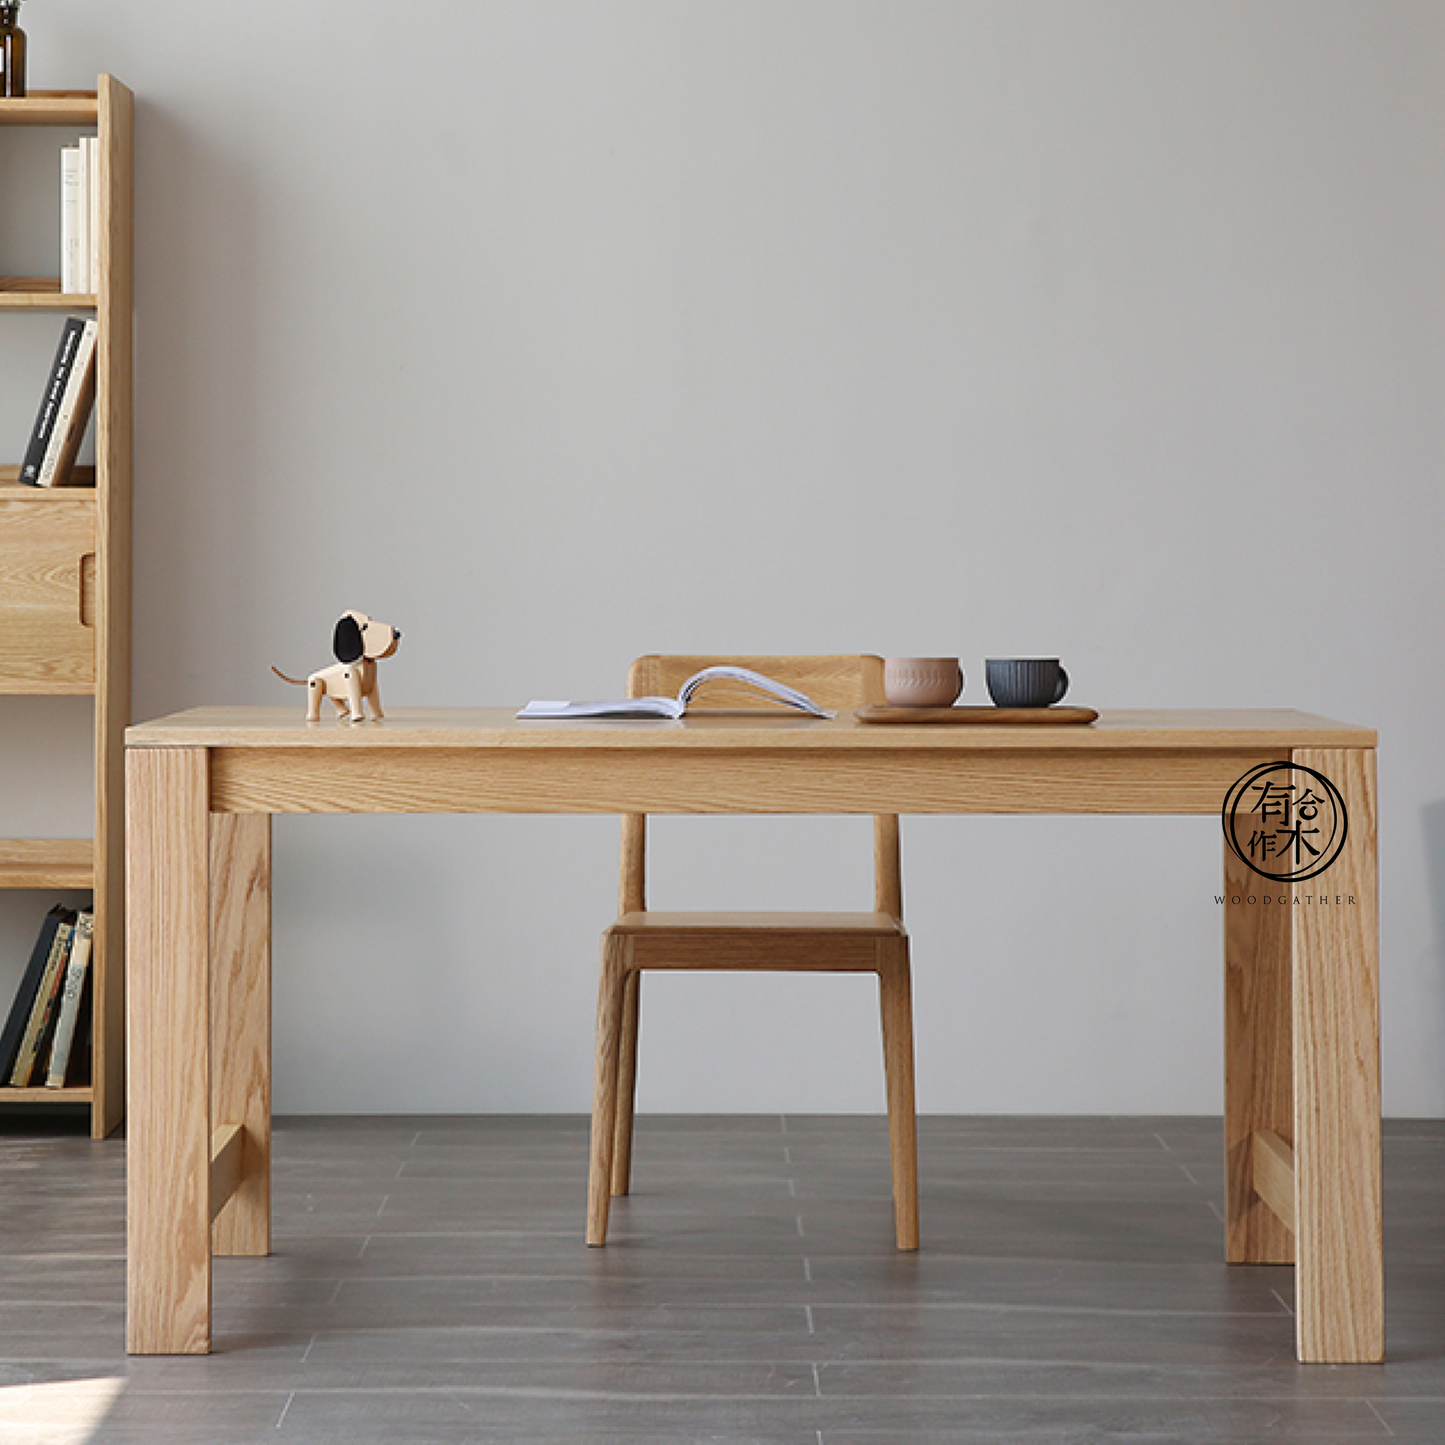 SIMPLY Square Dining Table 02 實木餐枱